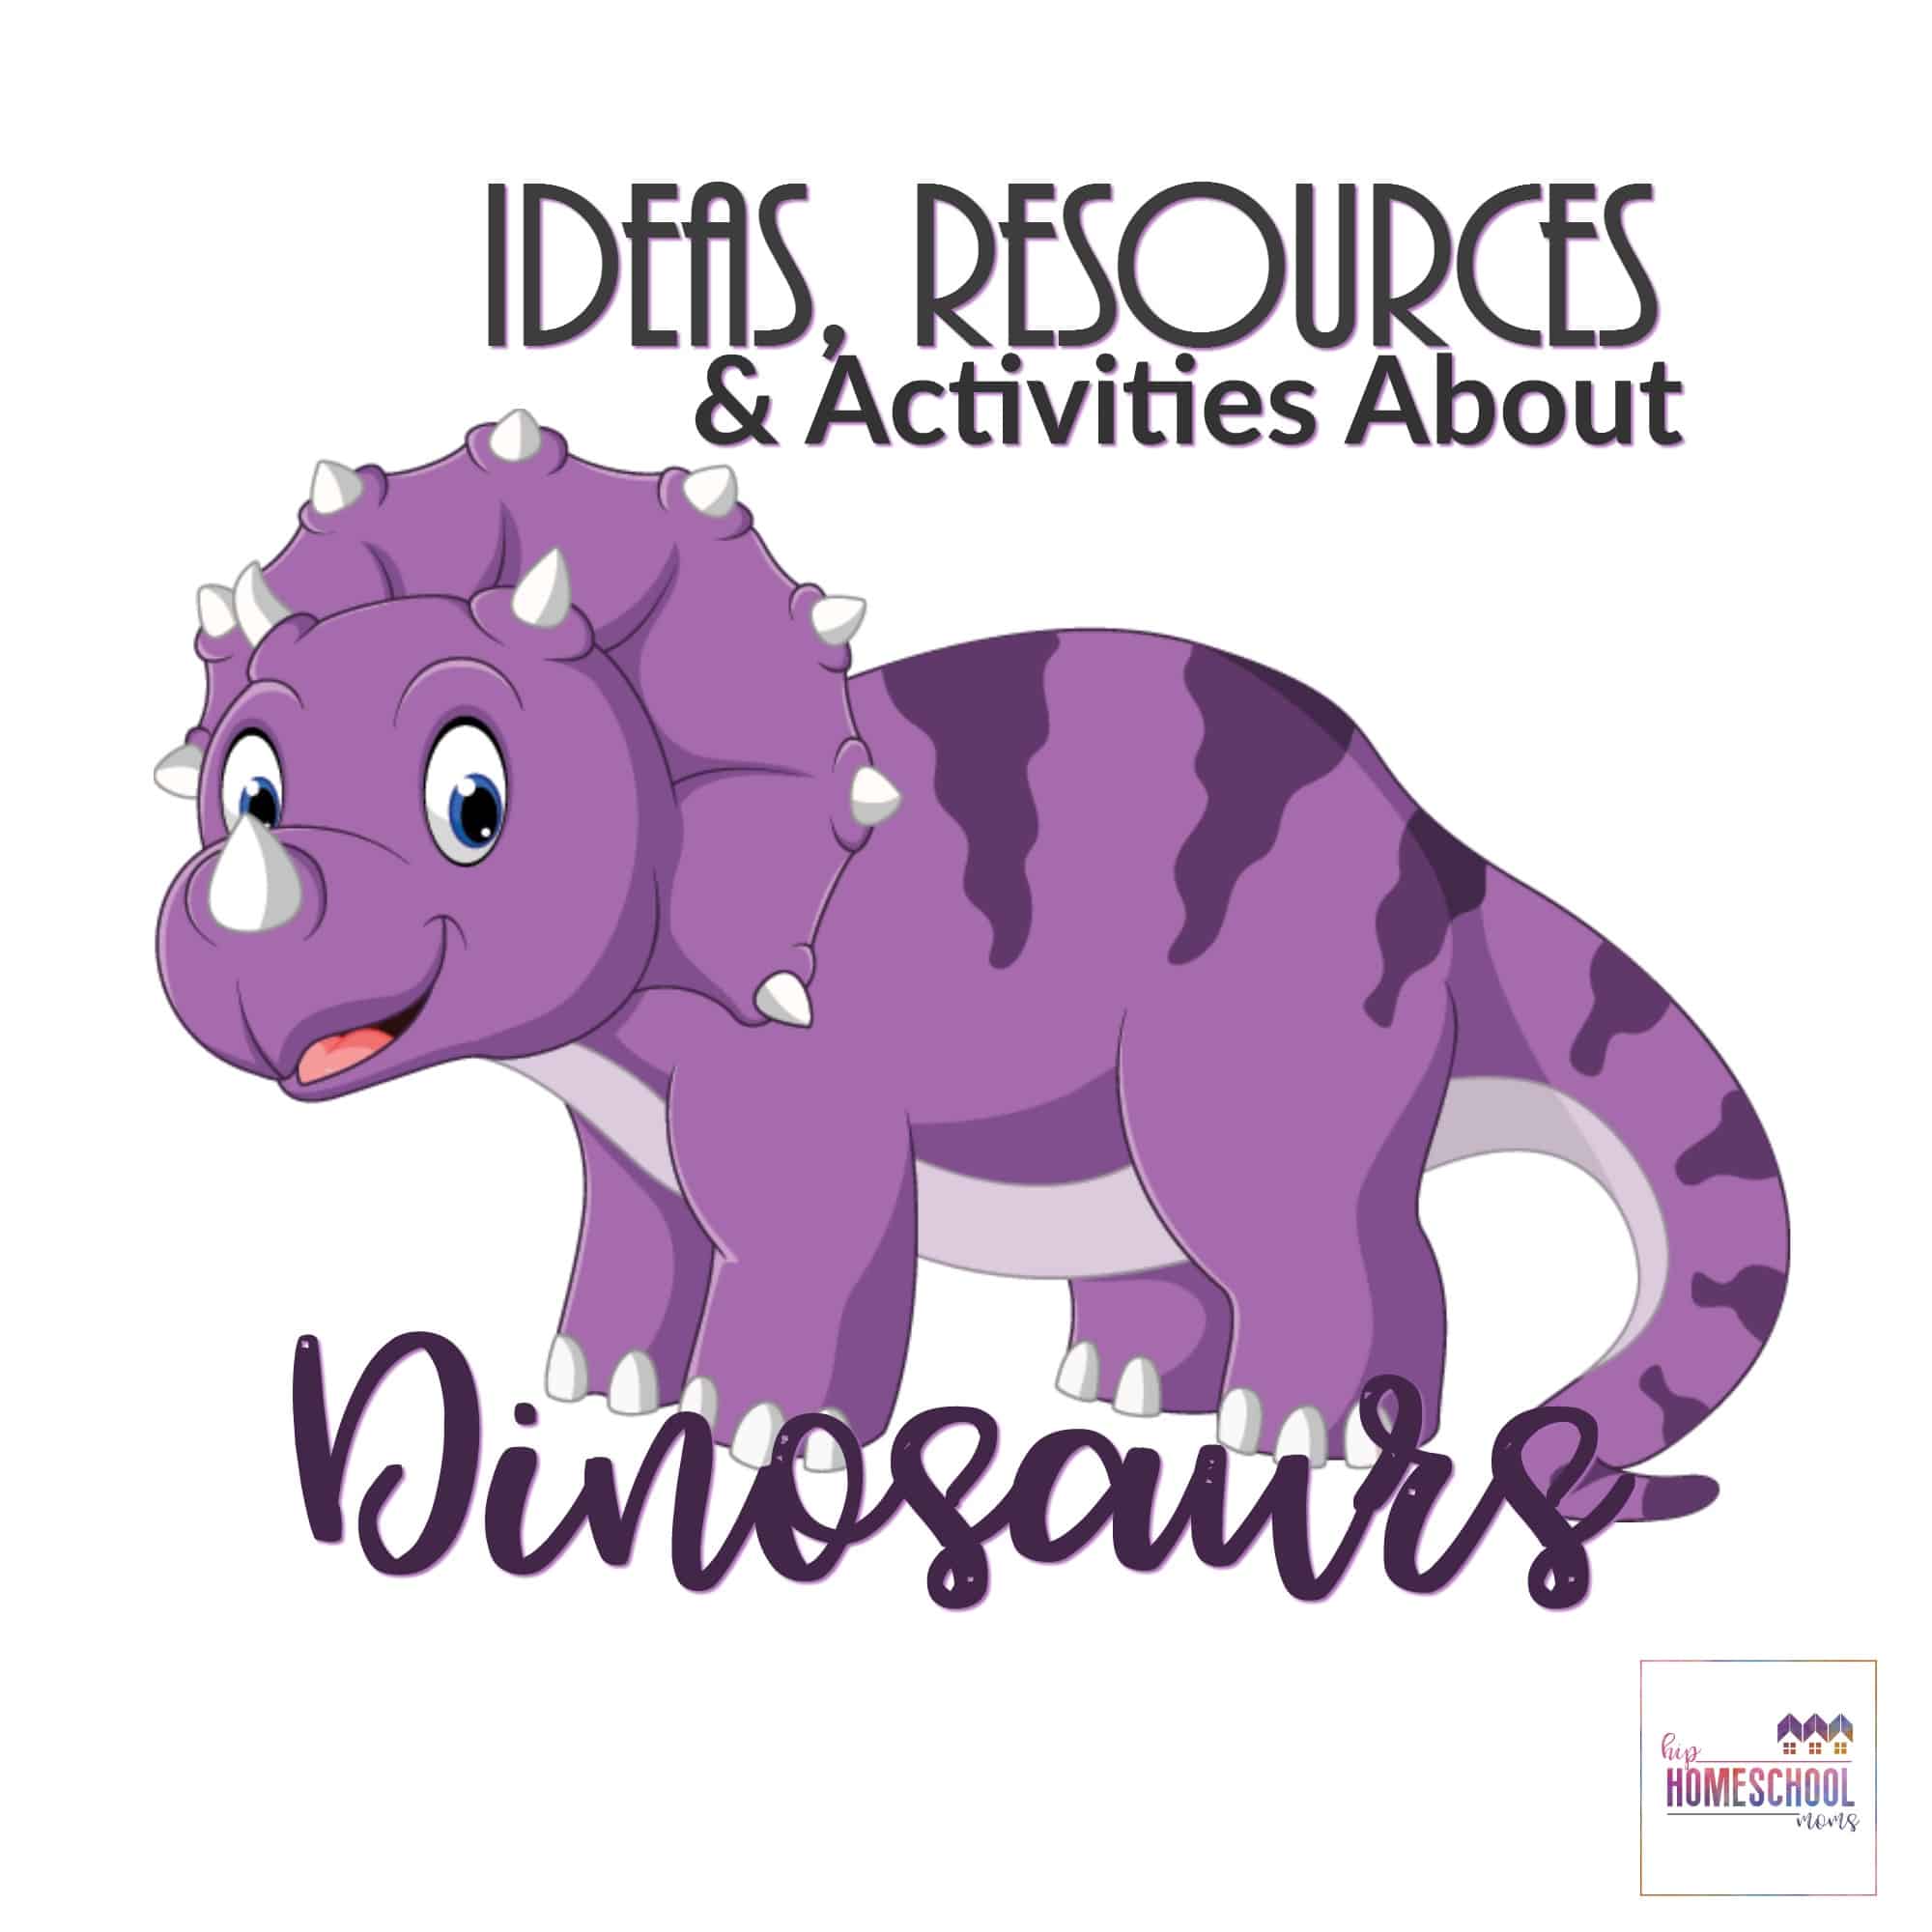 Ideas, Resources, and Activities About Dinosaurs